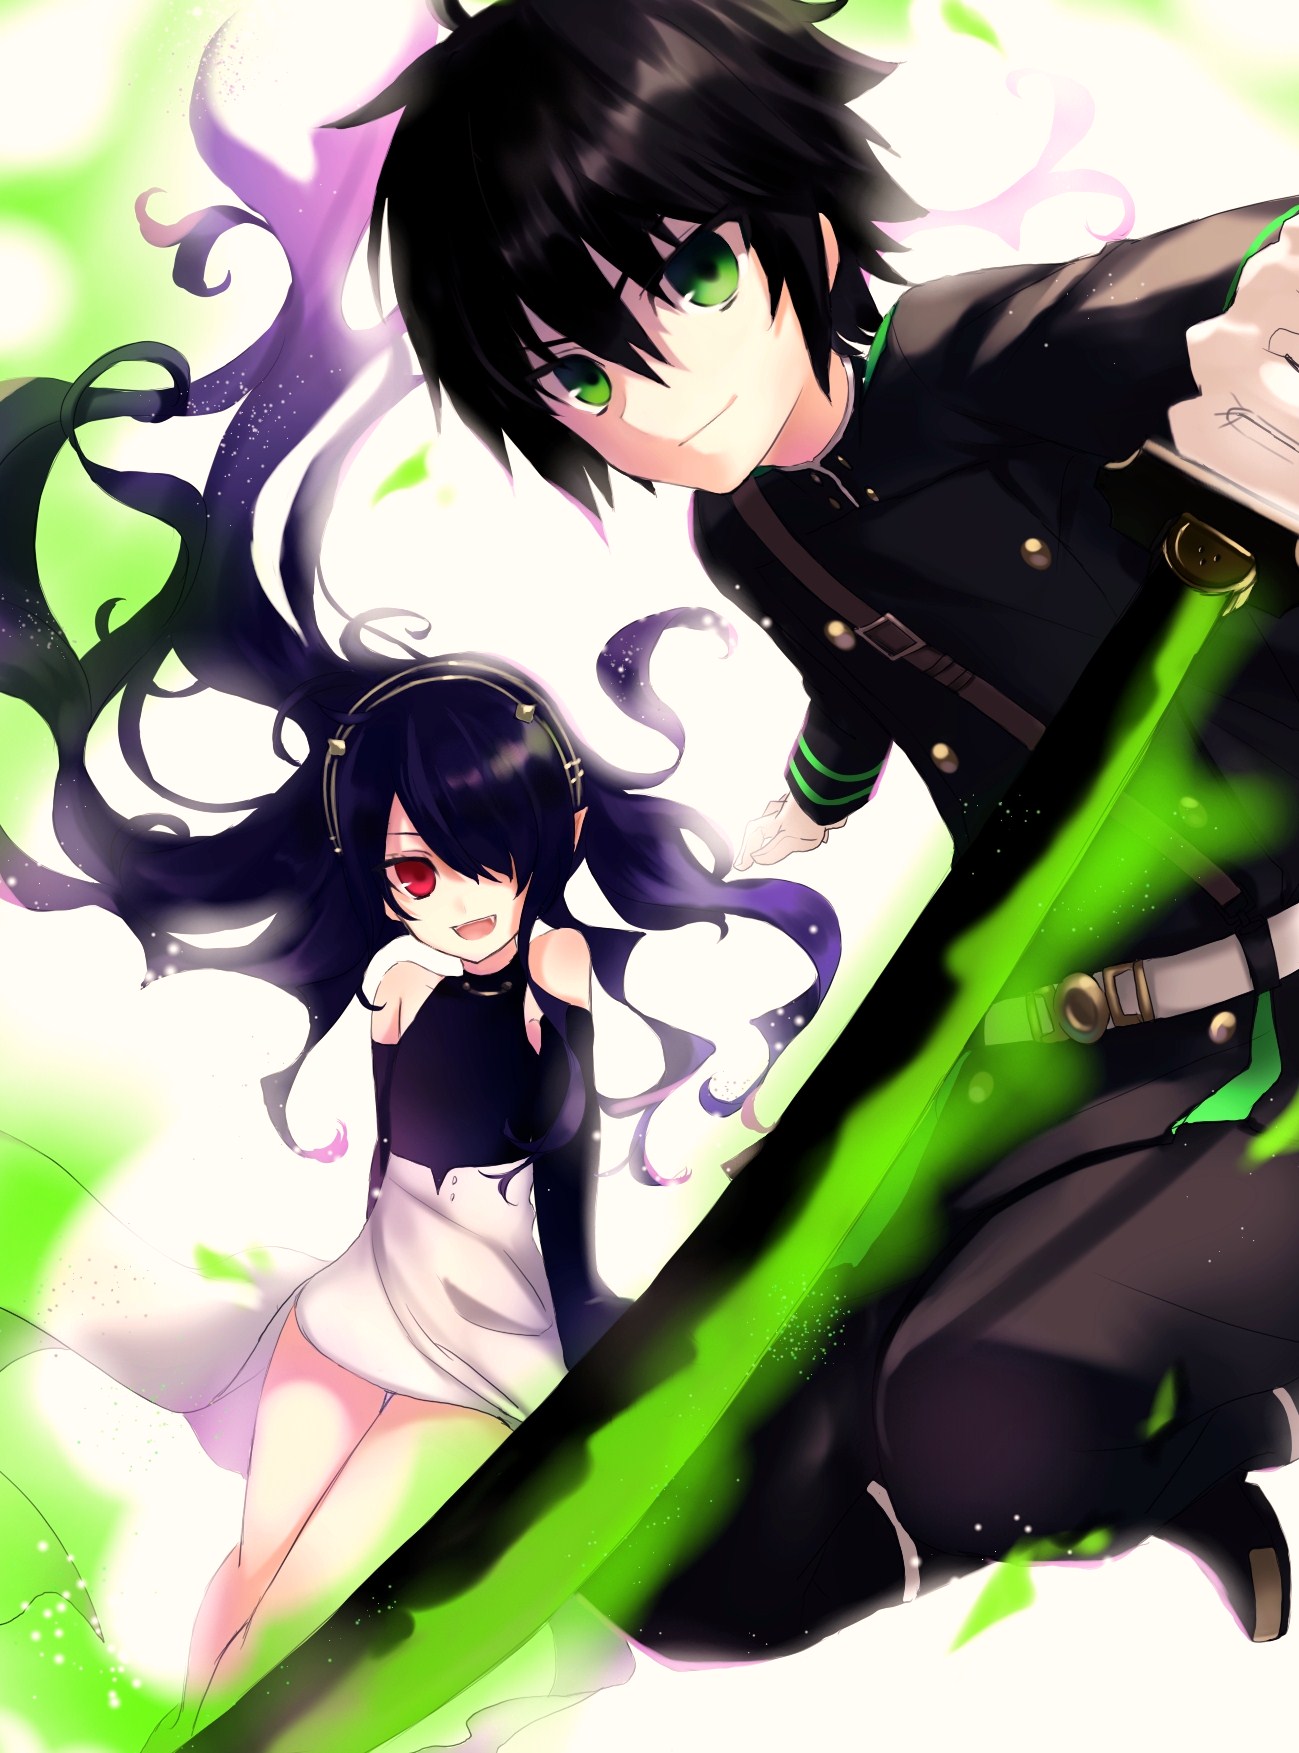 Seraph of the End Art